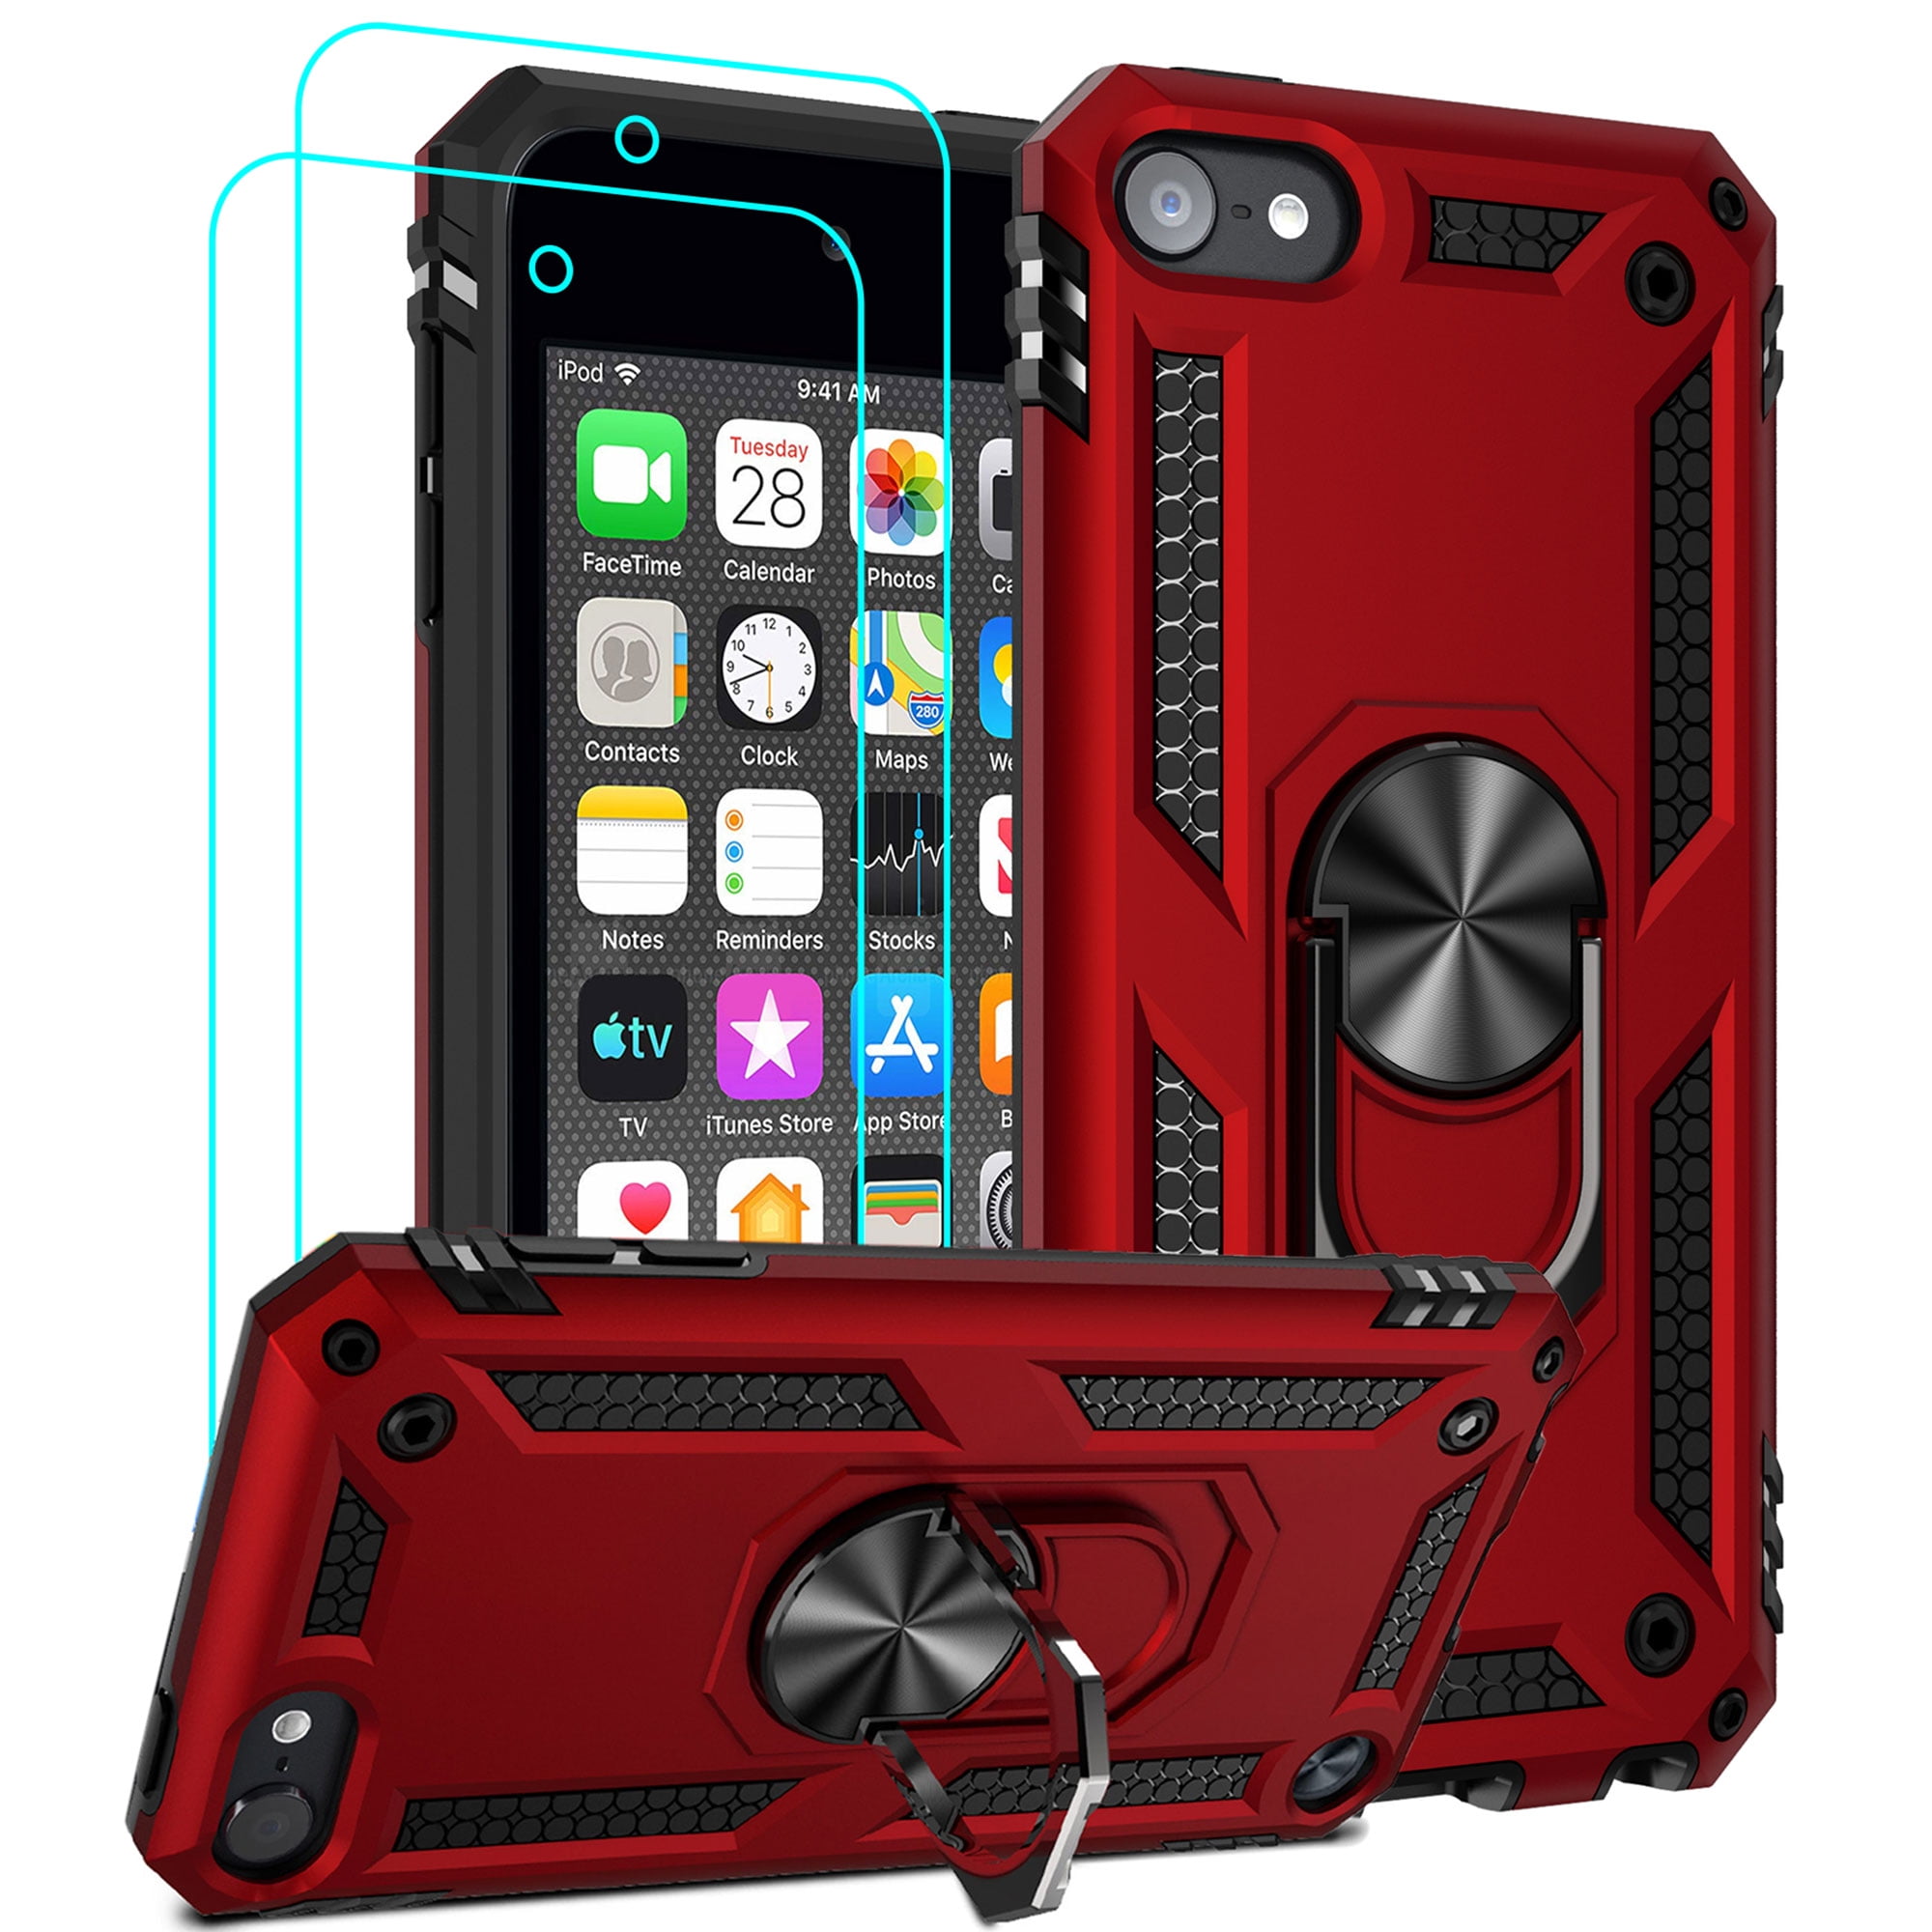 iPod Touch 7 Case,iPod Touch 6 Case with Car Mount,SLMY Hybrid Rugged Shockproof Cover with Built-in Kickstand for Apple iPod Touch 5 6 7th Generation Mint 